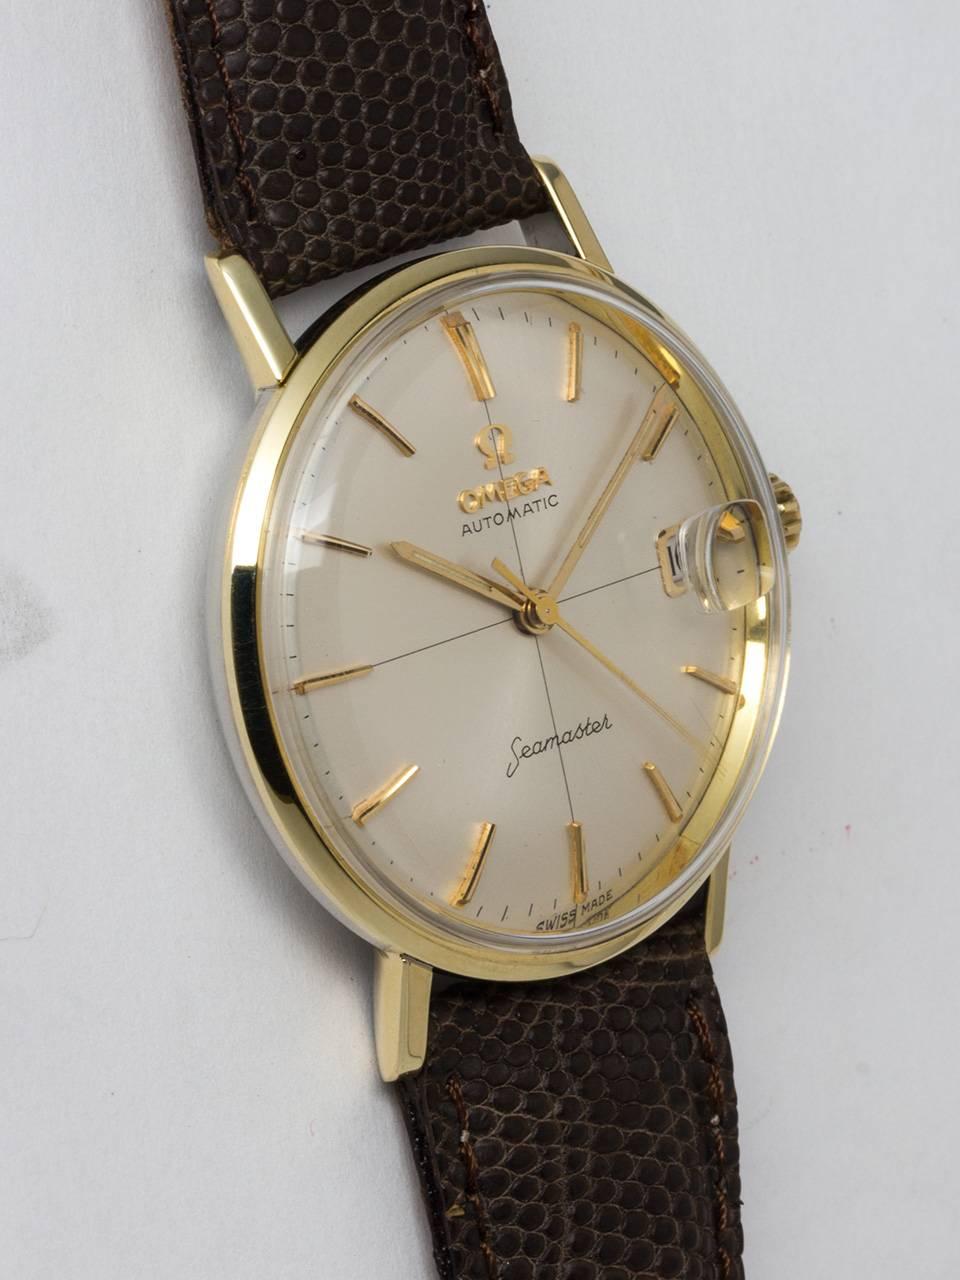 Omega 14K Yellow Gold Filled and Stainless Steel Seamaster Automatic Wristwatch, ref 14730 circa 1960s. Featuring 35 x 40mm gold shell top and stainless steel back with deeply embossed Seamonster logo. Smooth bezel, straight lugs and acrylic crystal